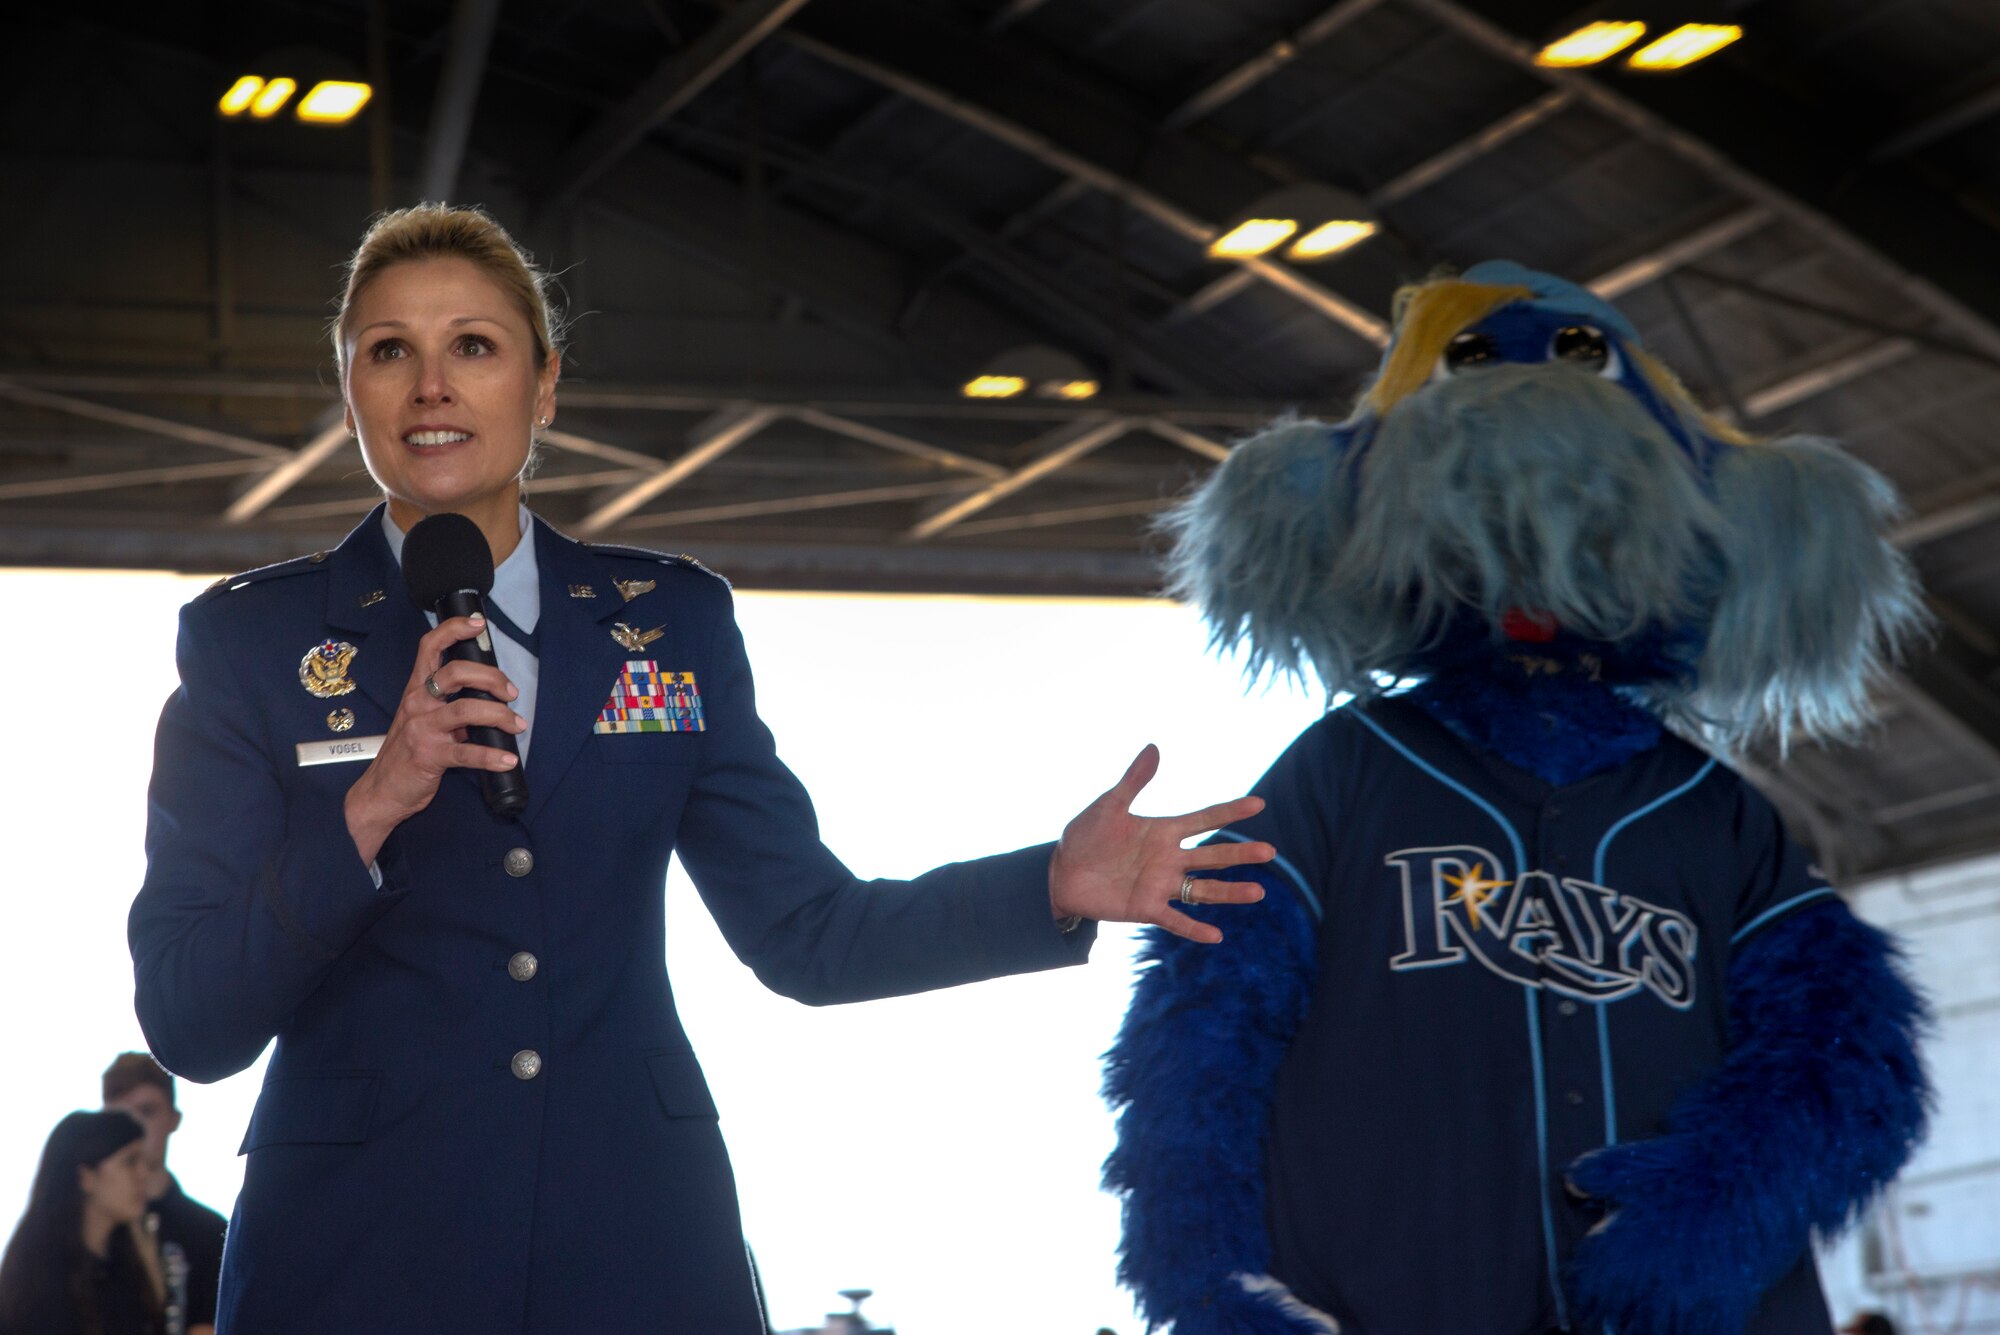 U.S. Air Force Col. April Vogel, the commander for the 6th Air Mobility Wing, gave opening remarks during the Science, Technology, Engineering, Arts and Math (STEAM) Day at MacDill Air Force Base, Fla., March 21, 2018.